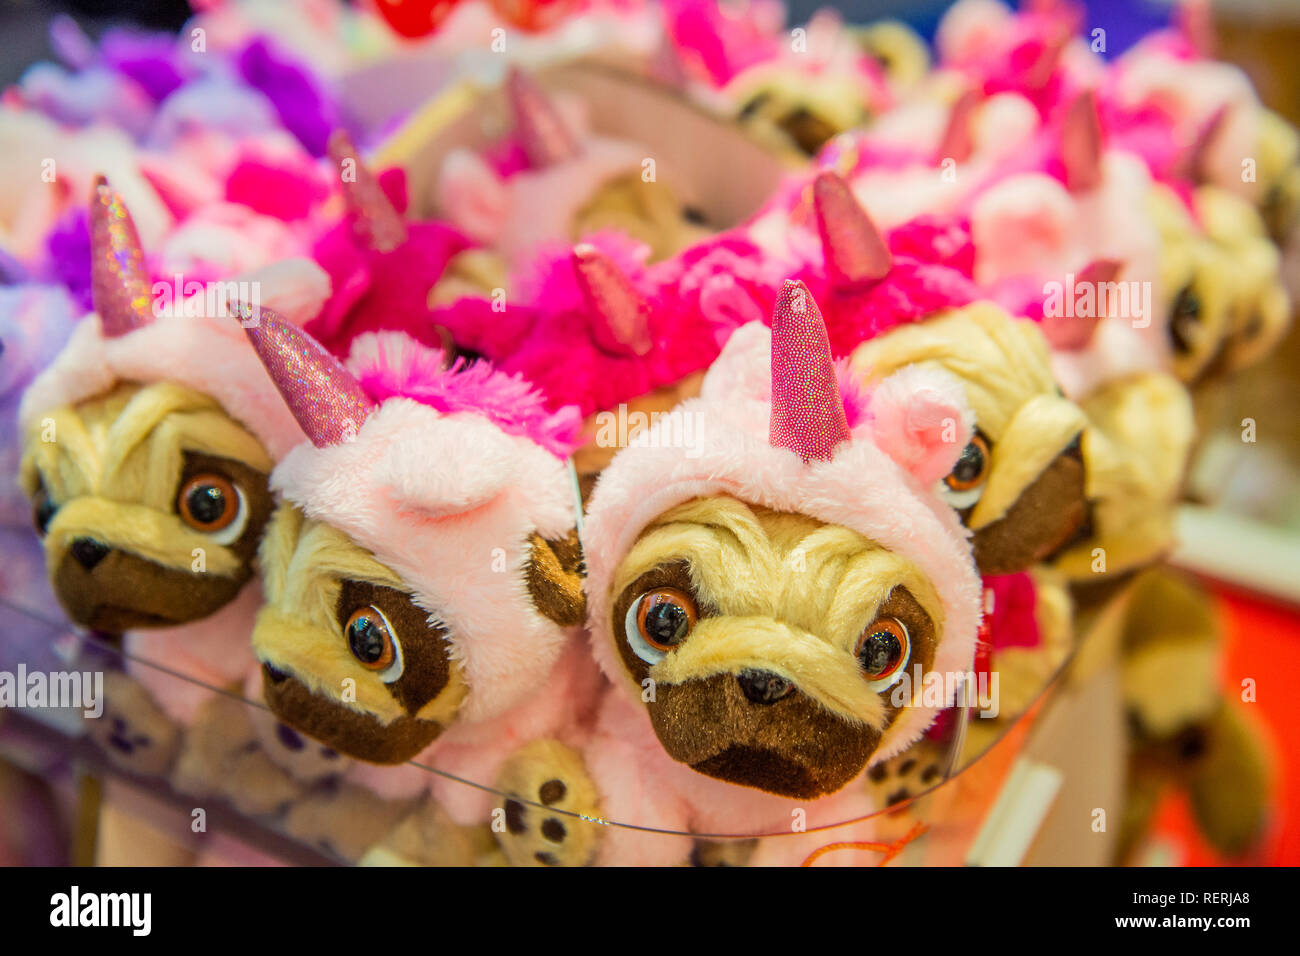 London, UK. 22nd Jan 2019. Pugsley soft toys on the Keel Toys Stand - The  Toy Fair at Olympia in London. Credit: Guy Bell/Alamy Live News Stock Photo  - Alamy